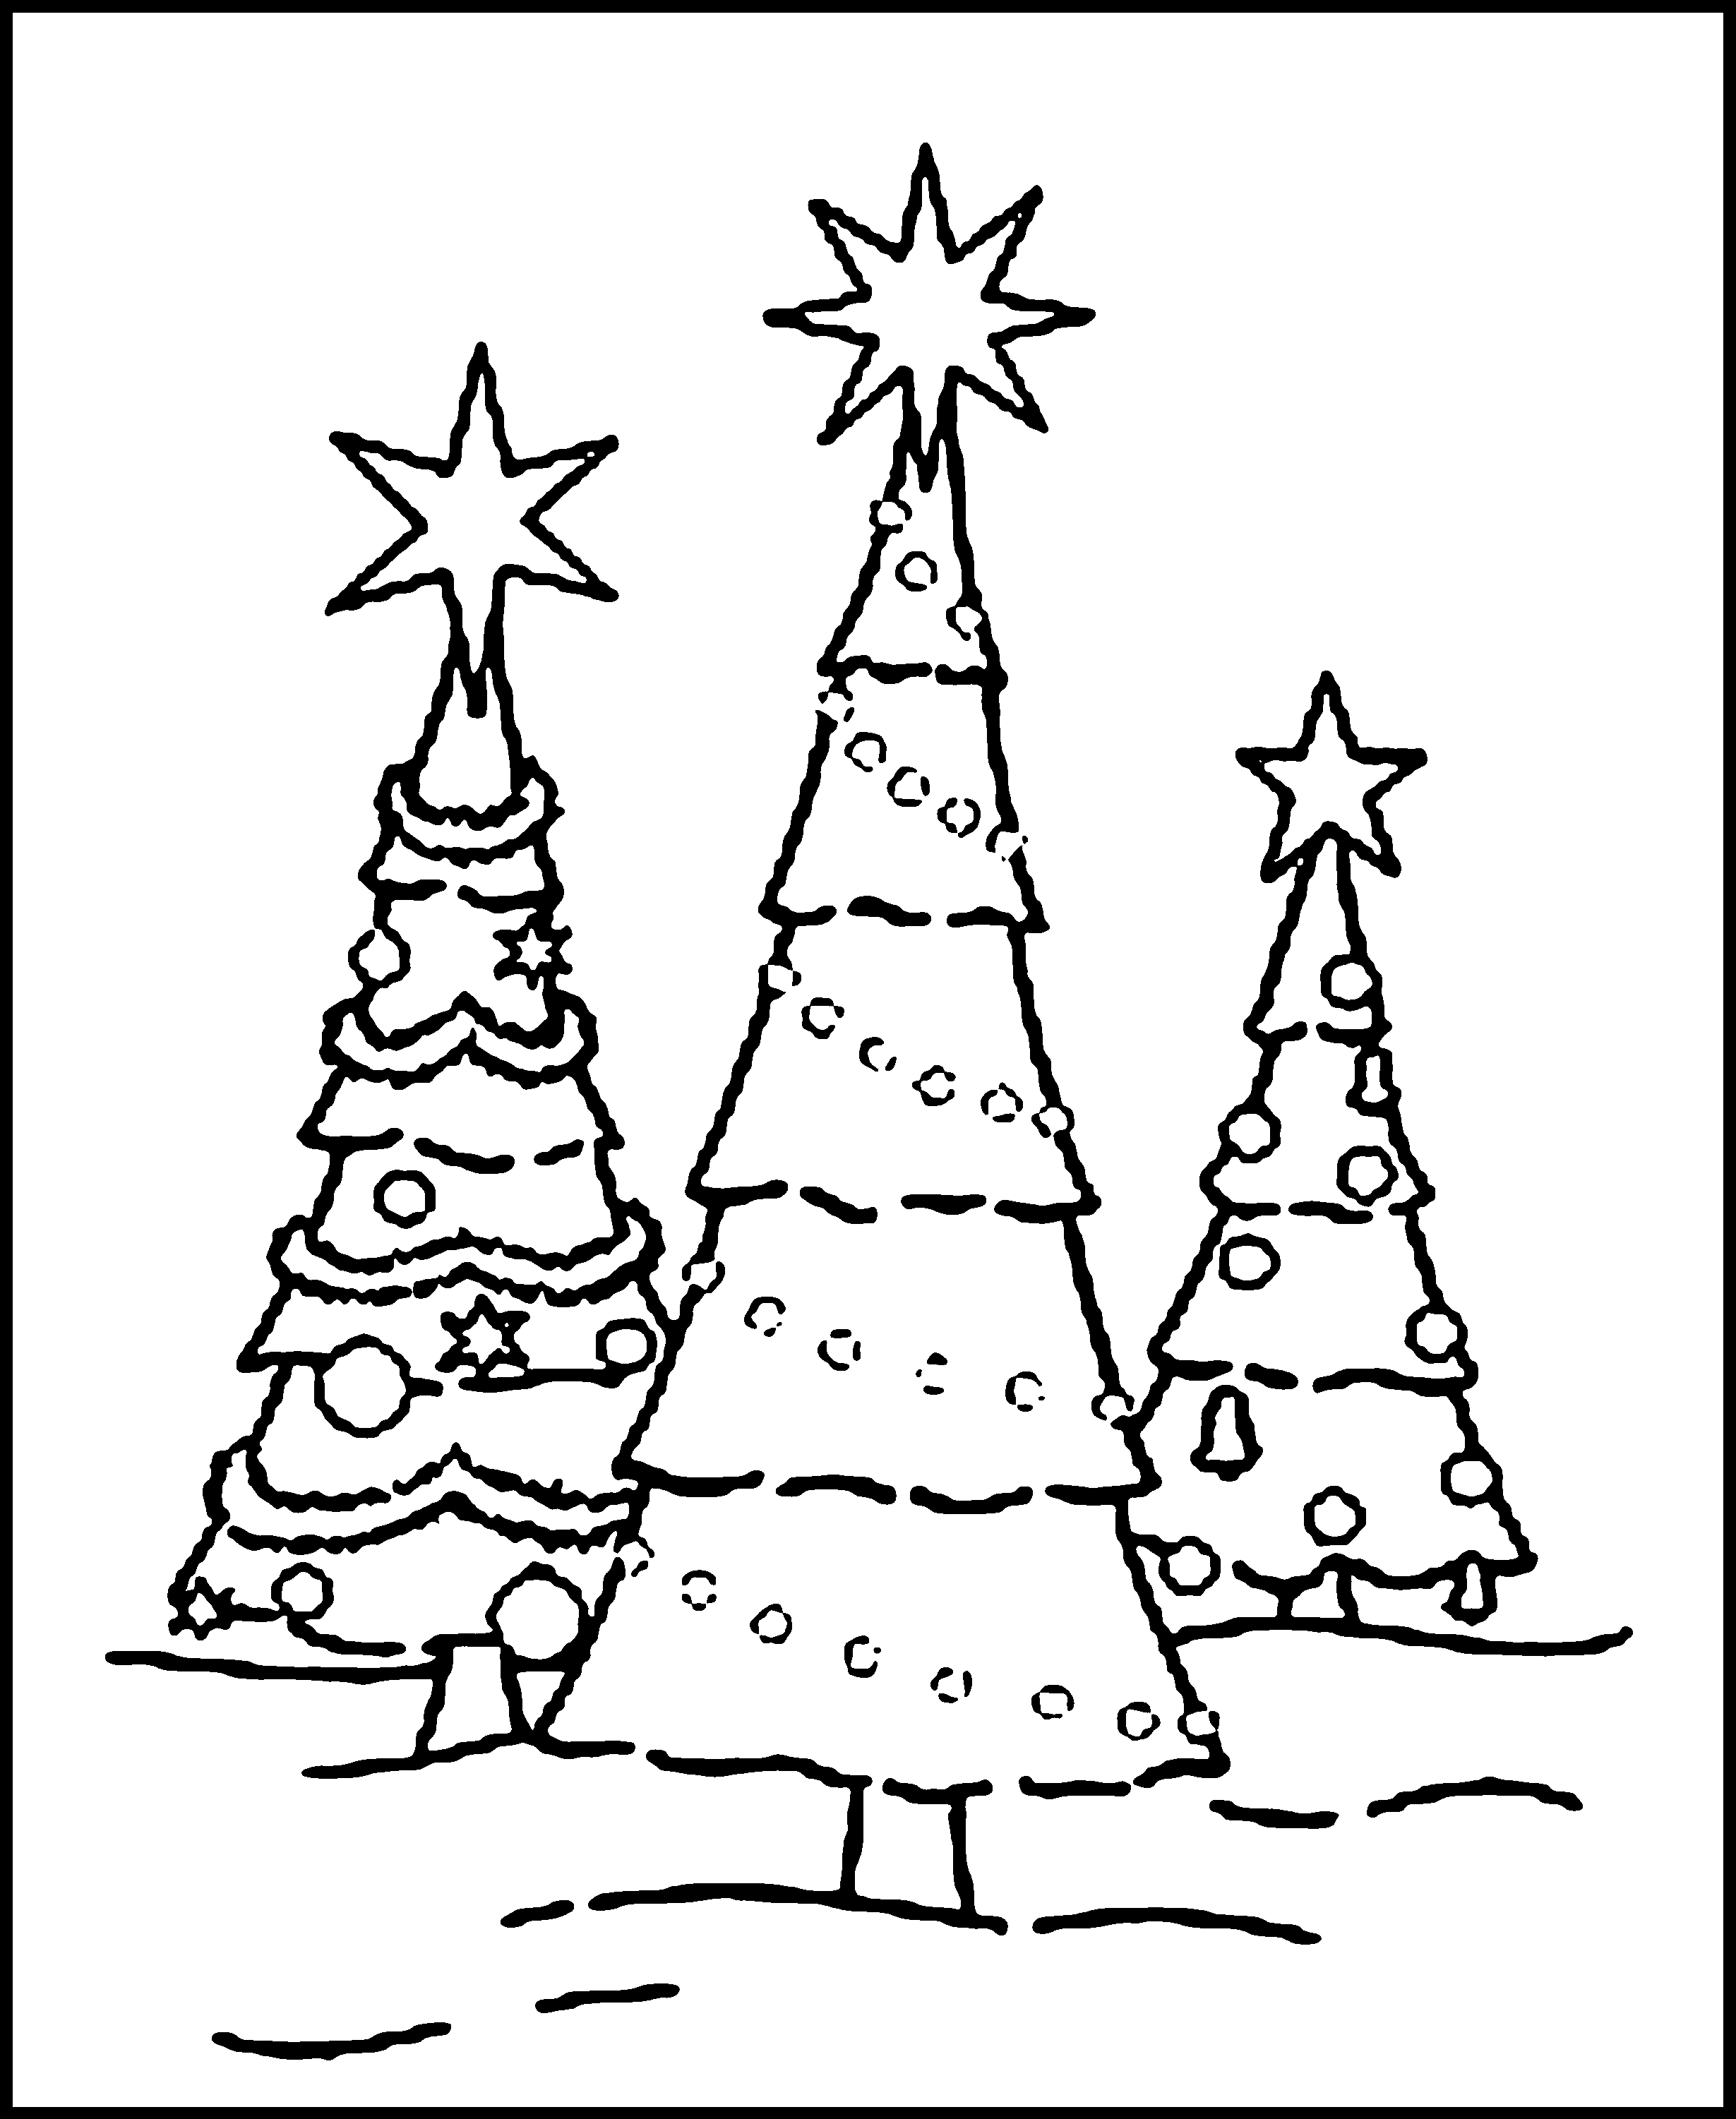 Christmas Coloring Page Pdf - Coloring Pages For All Ages - Coloring Home